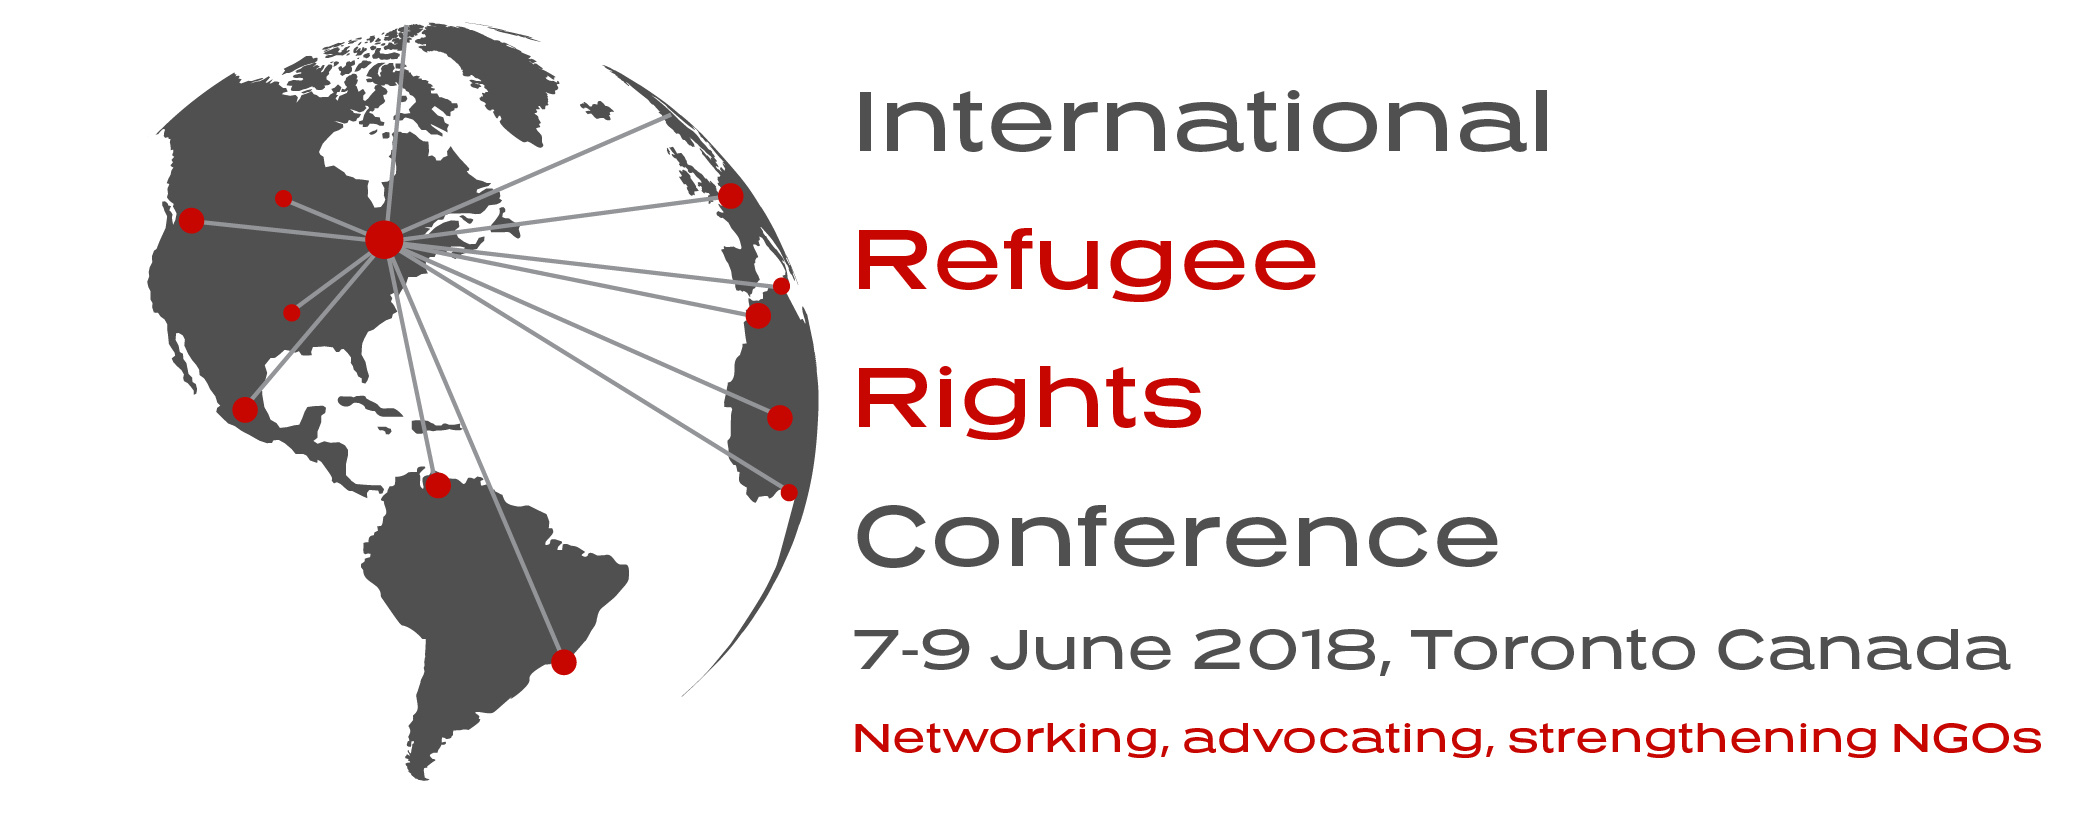 International Refugee Rights Conference